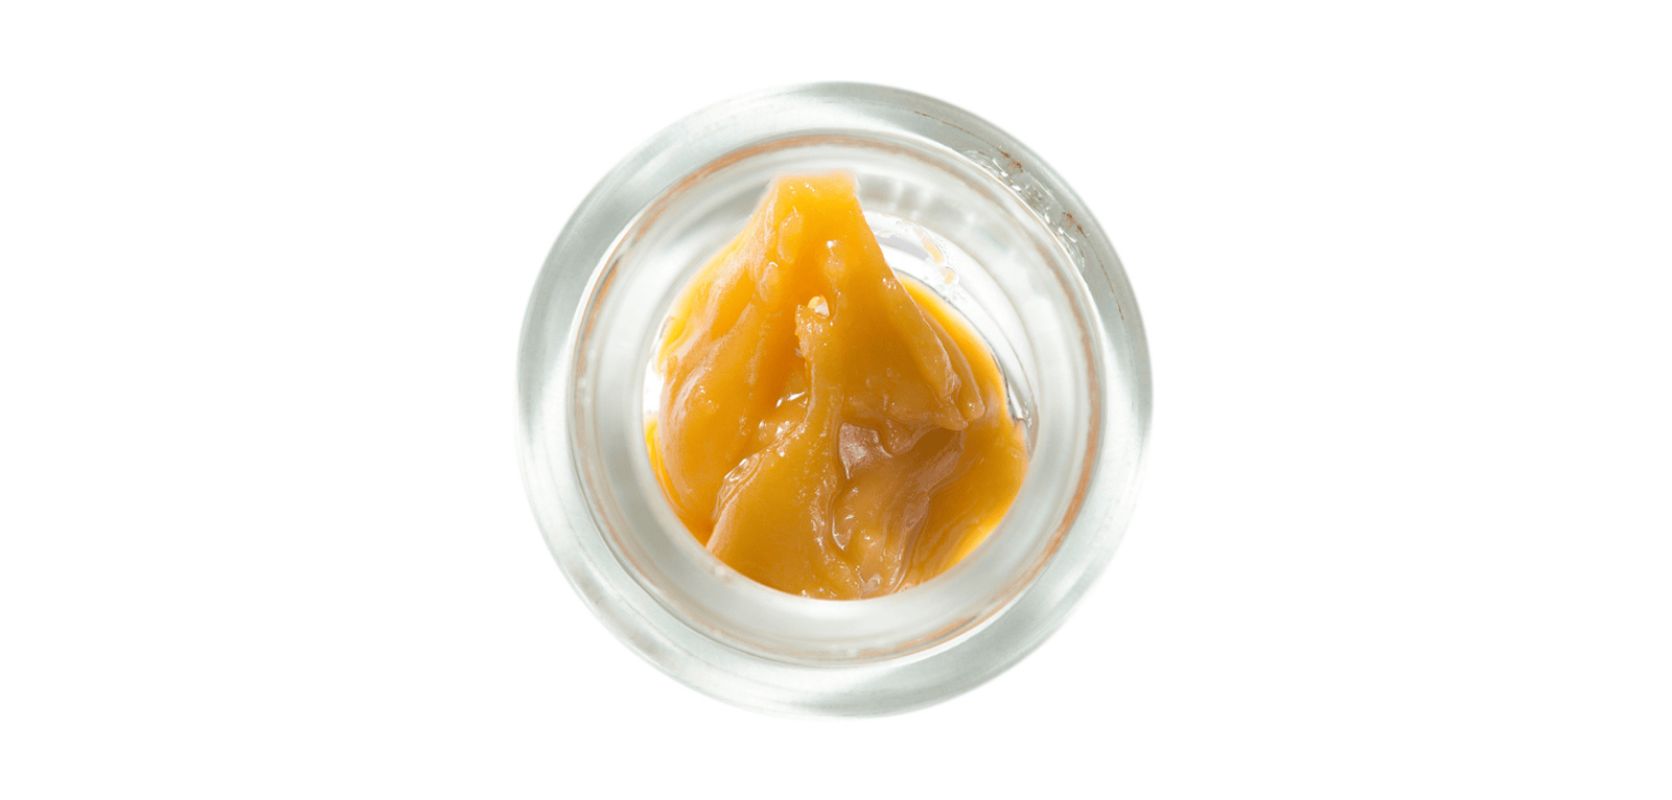 Canadians who order weed online look to buy budder for its various advantages